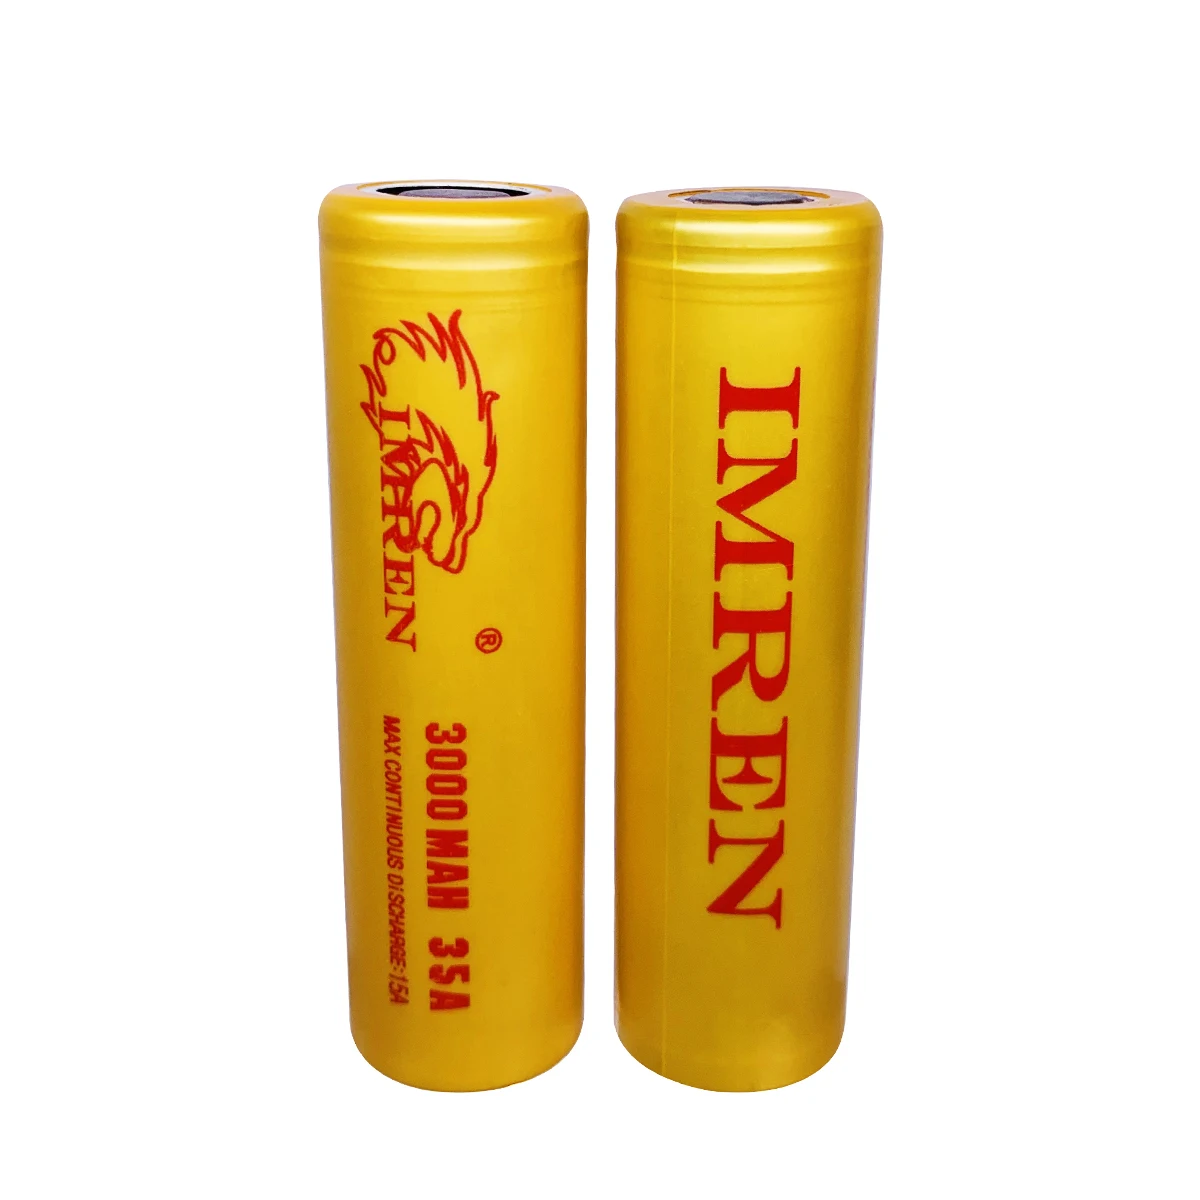 IMREN 18650 battery 3000 mah 15A/35A rechargeable lithium battery for vape and flashlights